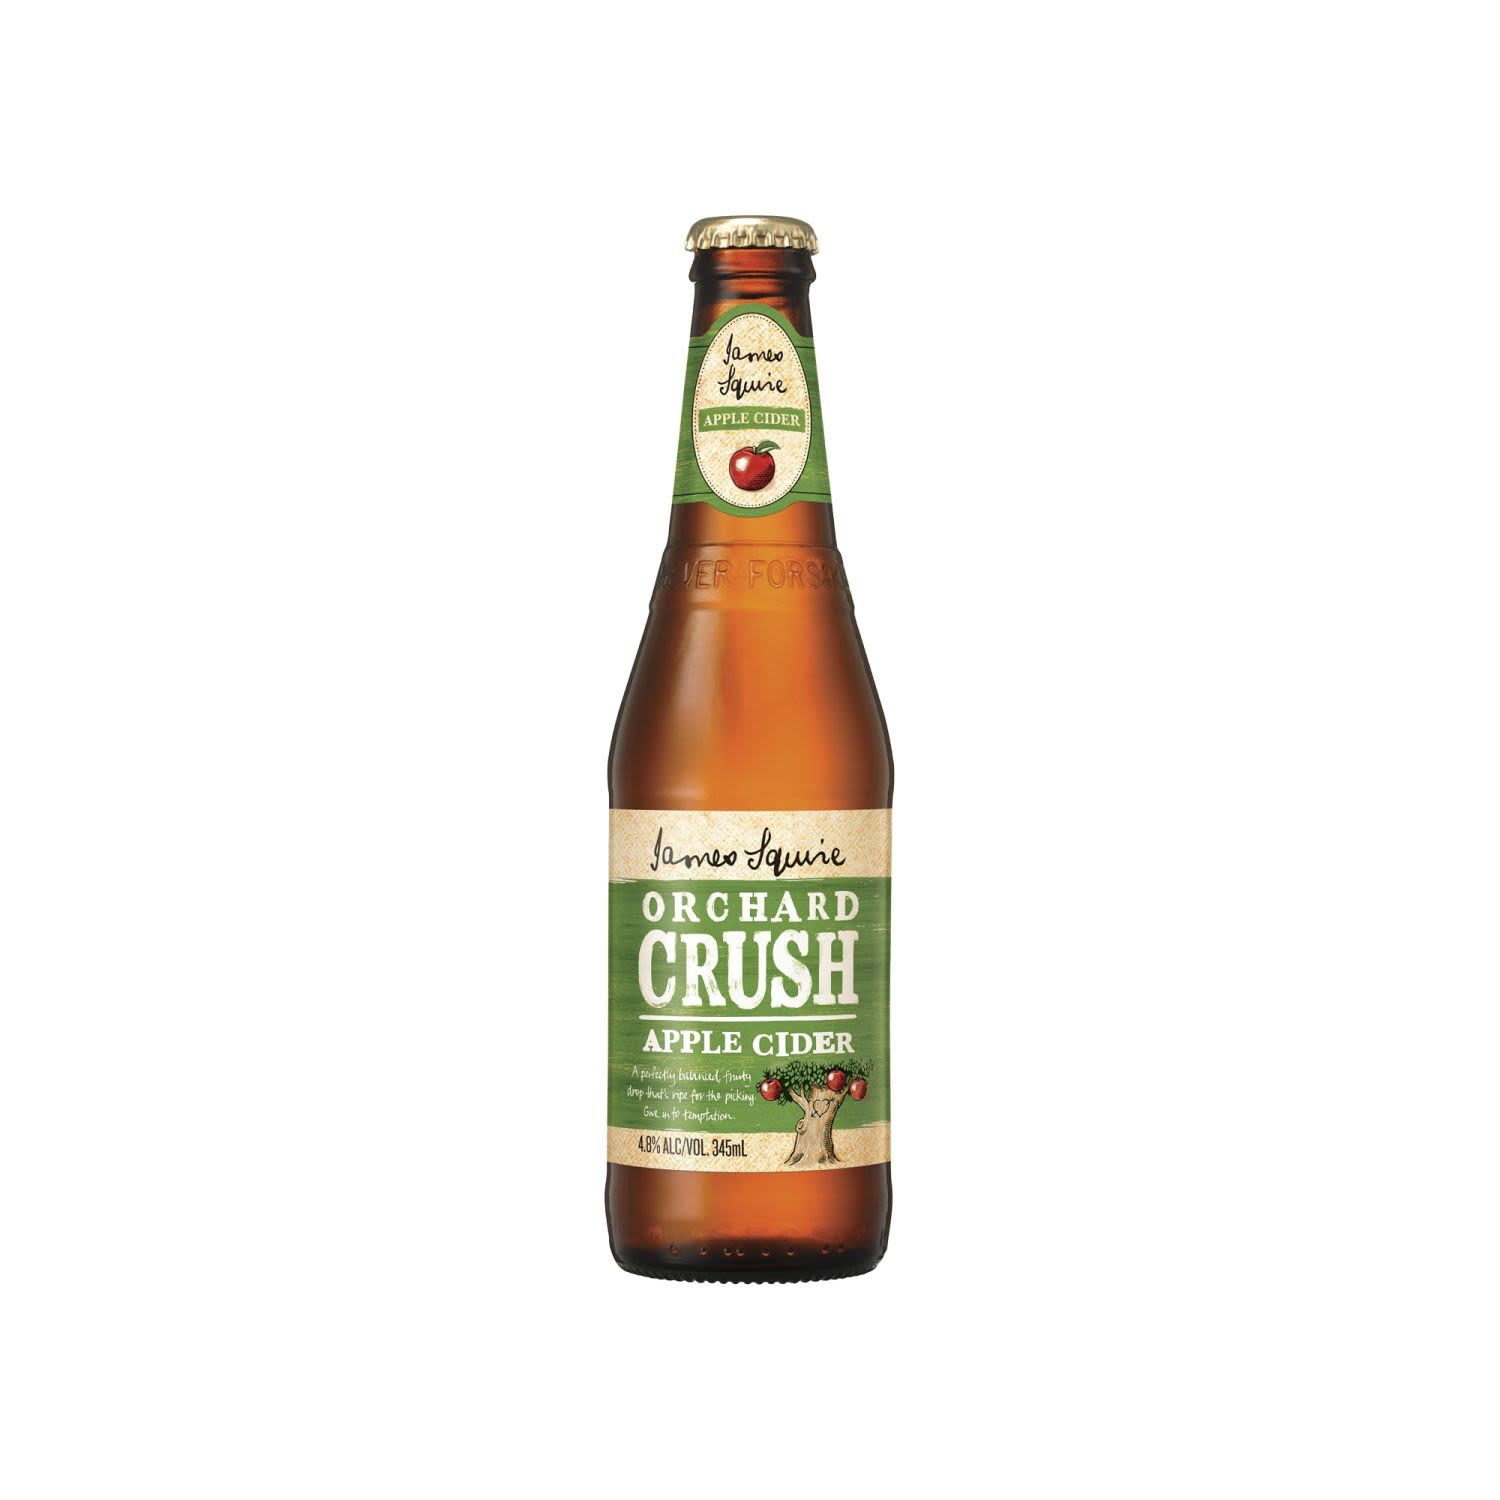 Refreshing, traditional style cloudy apple cider, with a fragrant aroma, clean palate and crisp finish. Colour varies from pale gold to straw due to the seasonality of fresh apple juice.<br /> <br />Alcohol Volume: 5.00%<br /><br />Pack Format: Bottle<br /><br />Standard Drinks: 1.4</br /><br />Pack Type: Bottle<br /><br />Country of Origin: Australia<br />